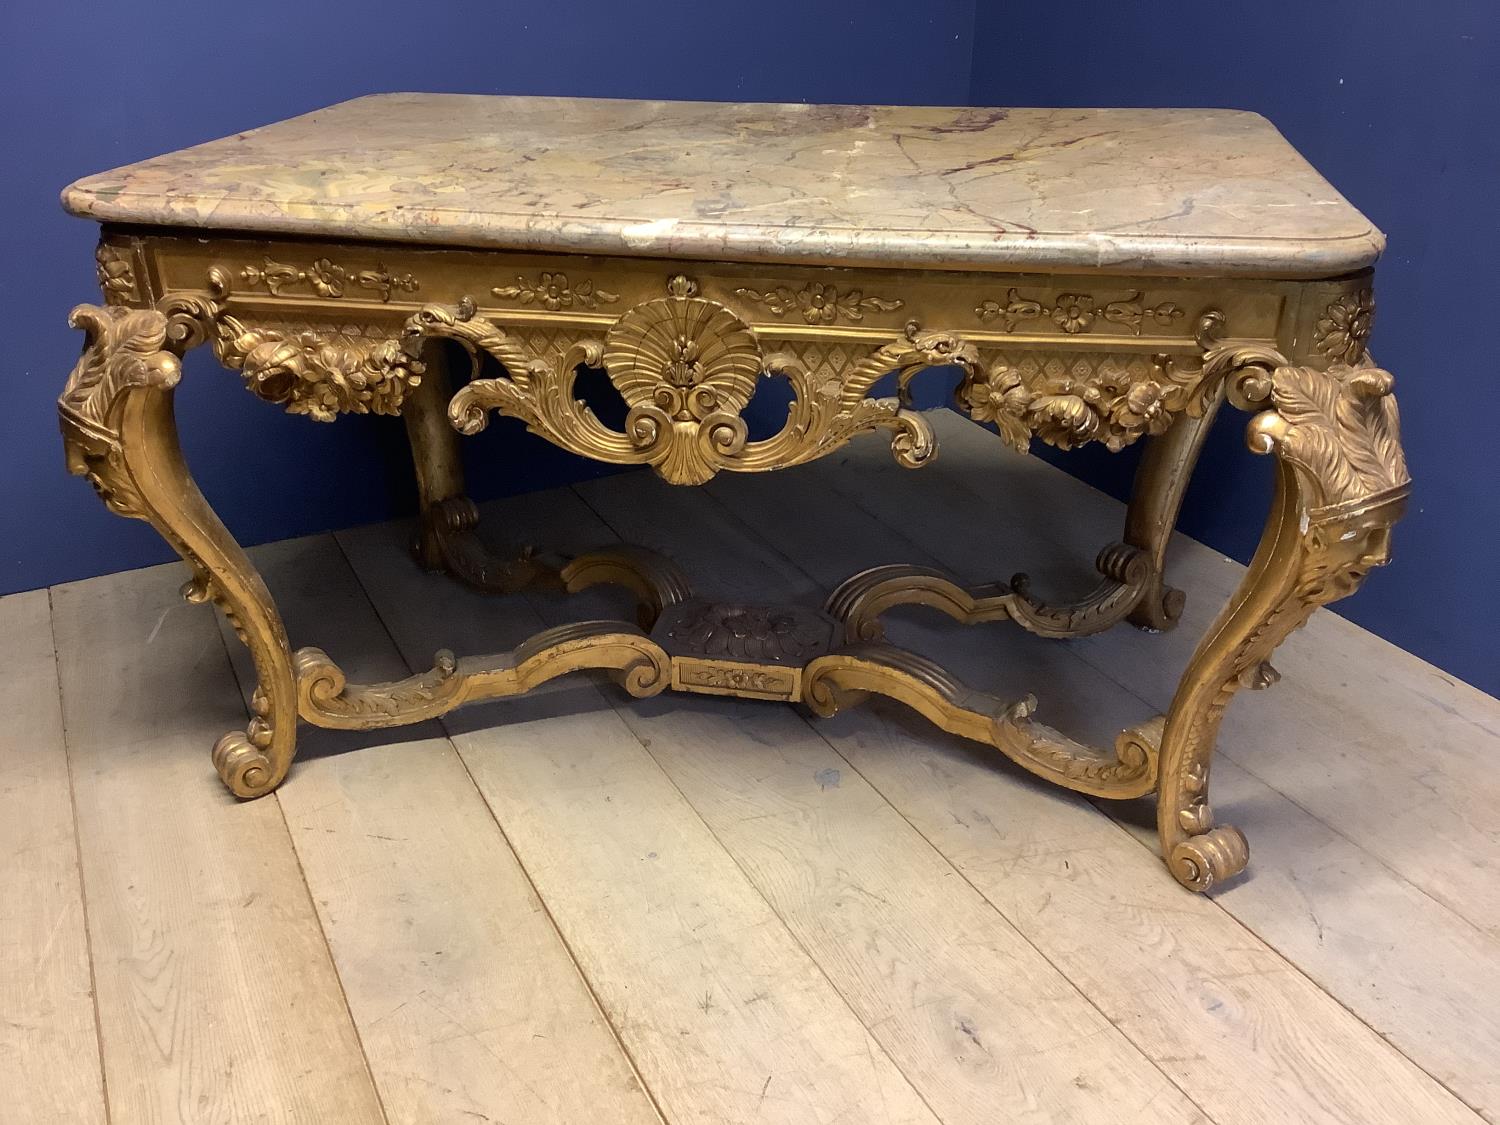 Early C18th/C19th giltwood side table in the manor of William Kent, elaborately carved & gilded unde